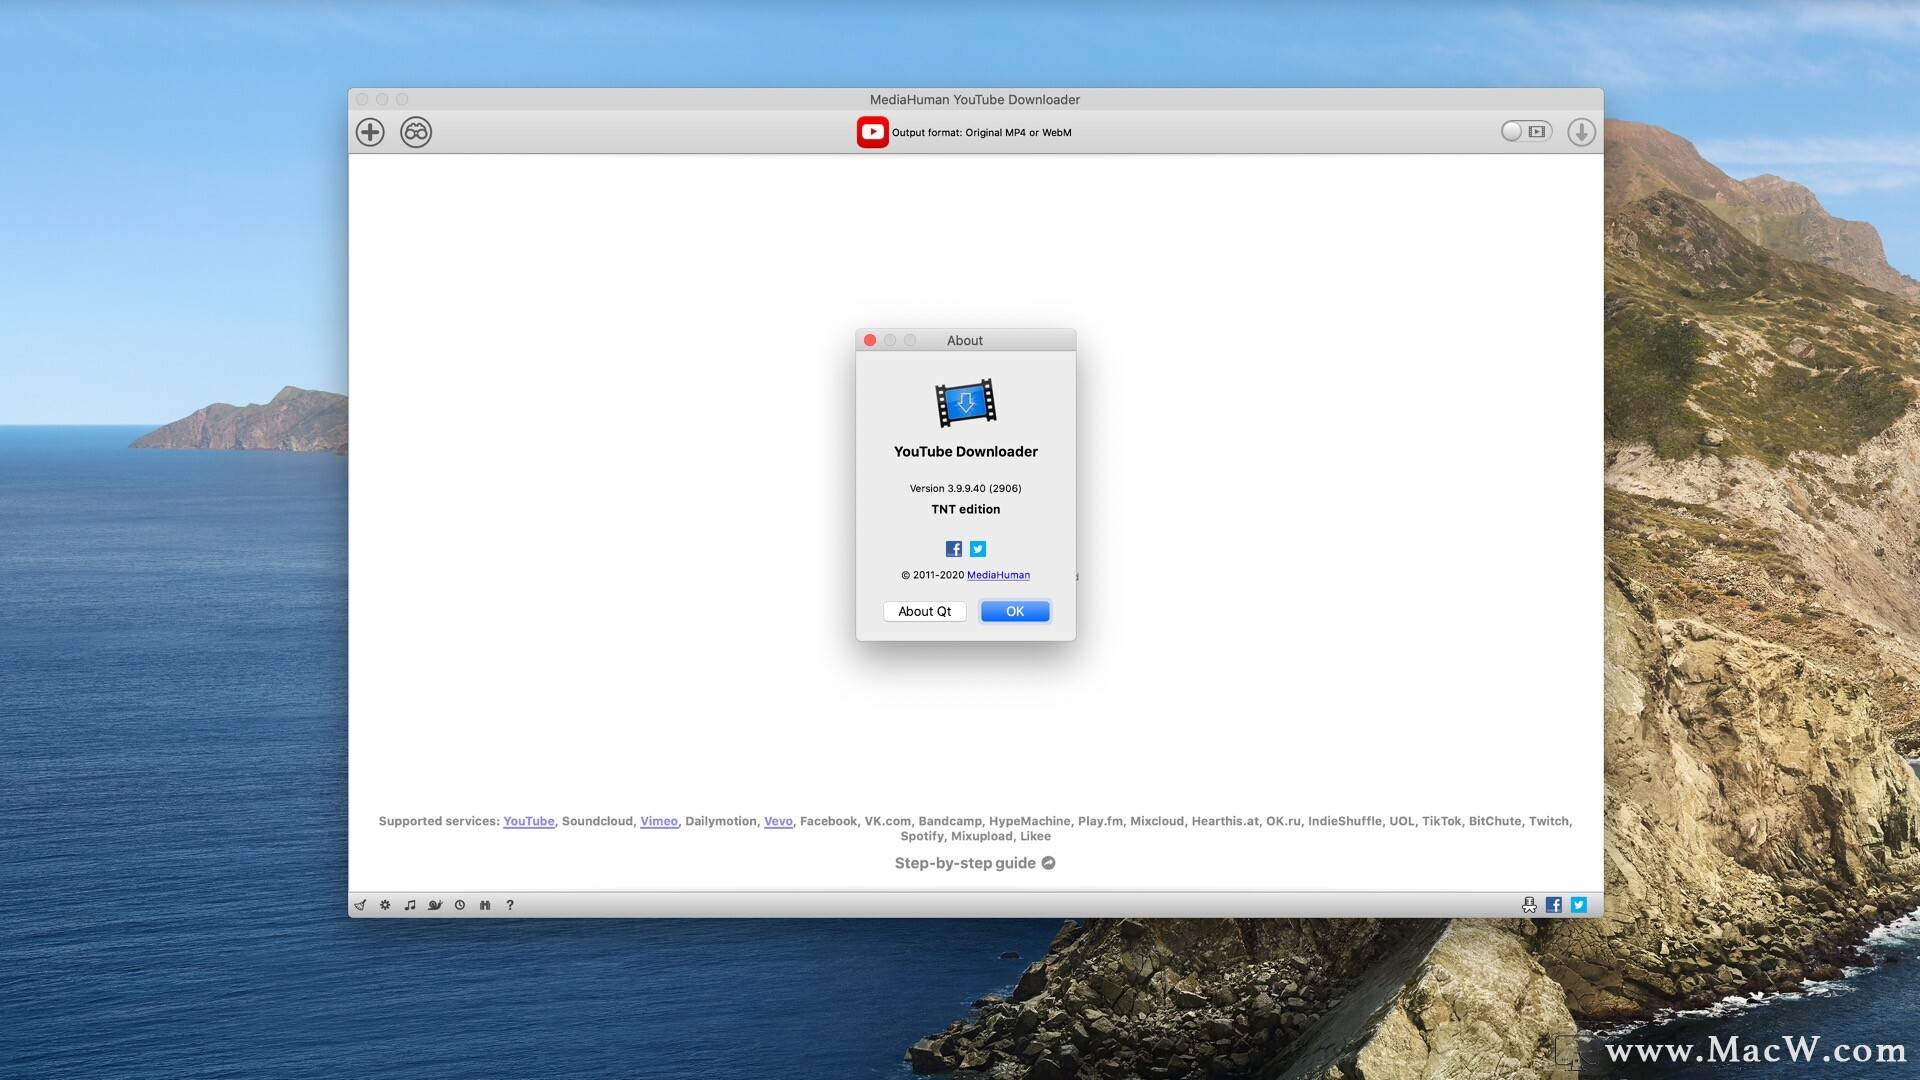 download the last version for mac MediaHuman YouTube Downloader 3.9.9.83.2406